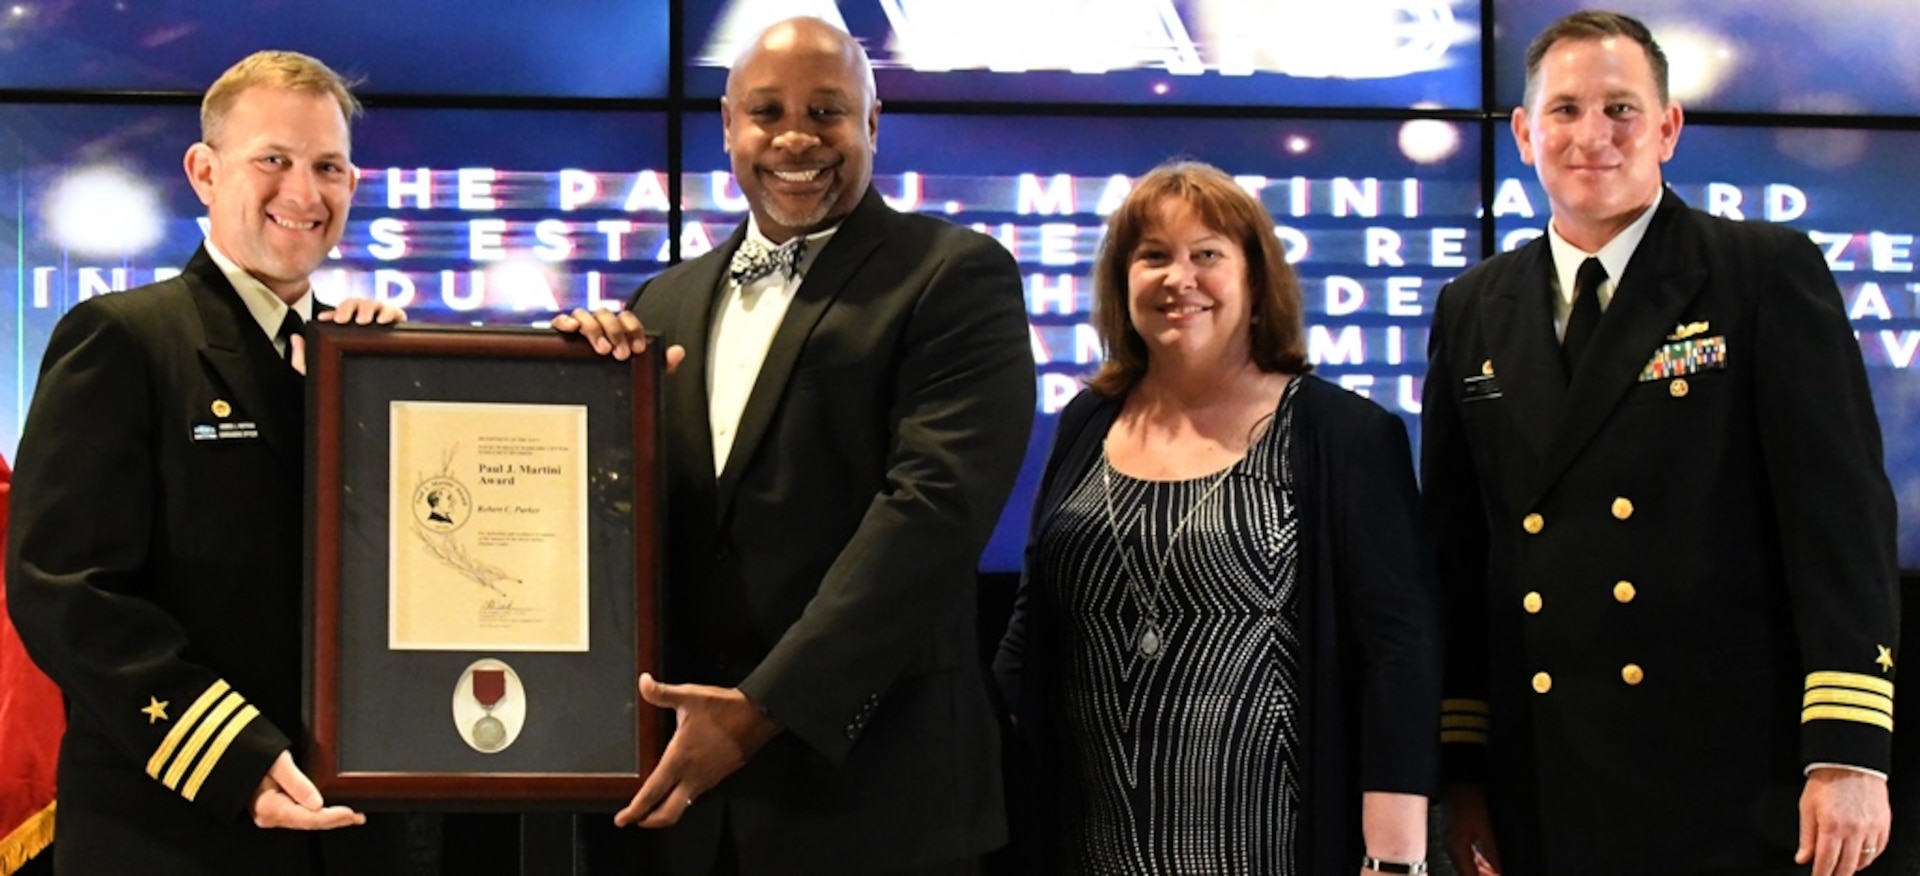 IMAGE: FREDERICKSBURG, Va. (May 10, 2019) – Robert Parker holds the Paul J. Martini Award moments after receiving it from Naval Surface Warfare Center Dahlgren Division (NSWCDD) leadership at the command’s annual honor awards ceremony. Parker was recognized for providing flawless executive assistance to the NSWCDD Dam Neck Activity commanding officer. Standing left to right: NSWCDD Dam Neck Activity Commanding Officer Cmdr. Andrew Hoffman; Parker; NSWCDD Deputy Technical Director Angela Beach; and NSWCDD Commanding Officer Cmdr. Stephen ‘Casey’ Plew.  (U.S. Navy photo/Released)